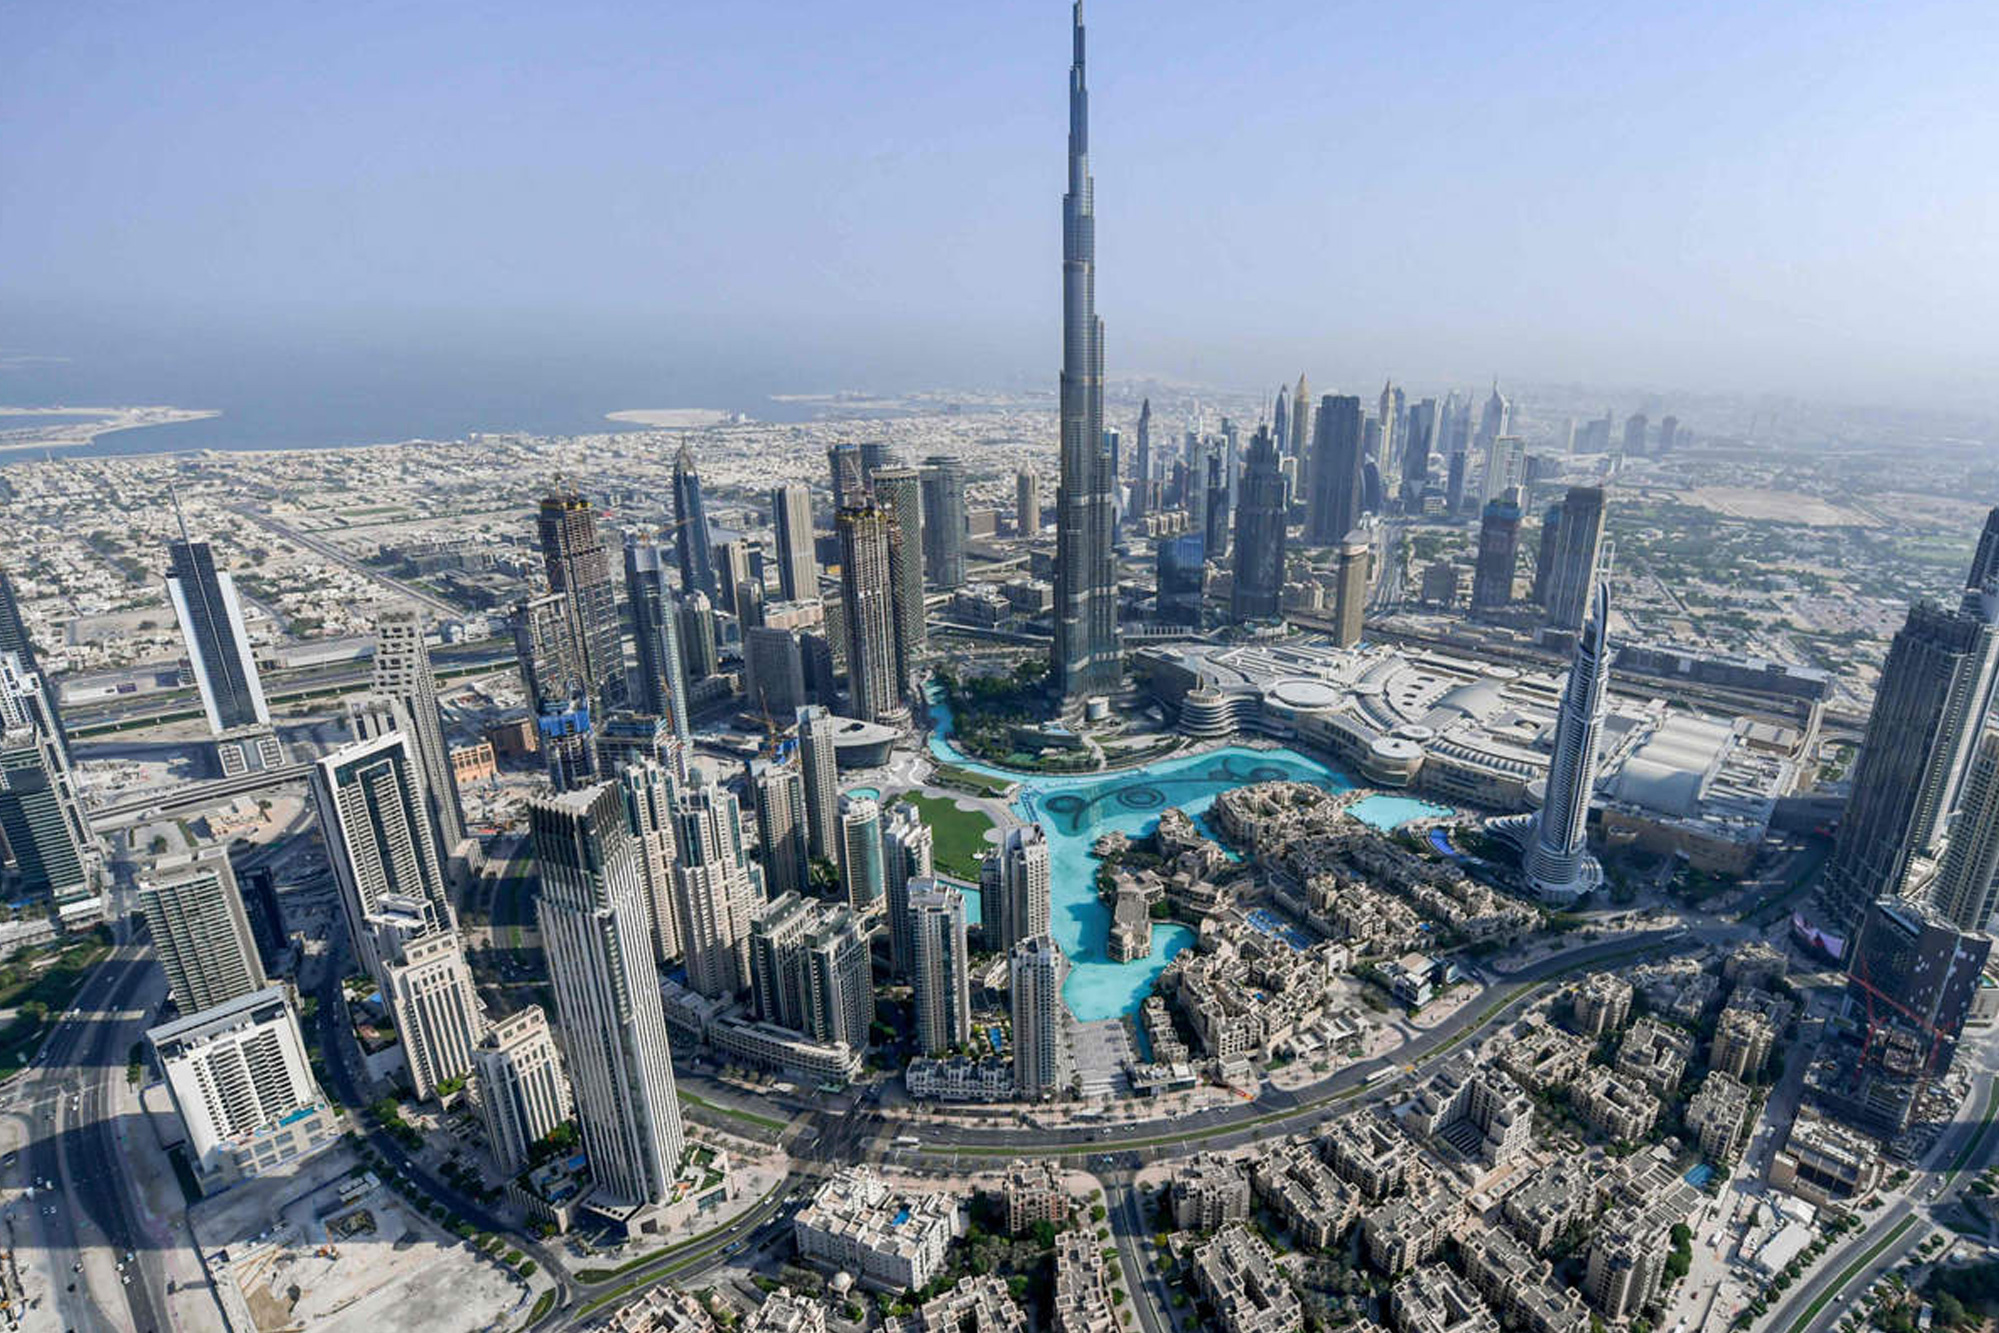 Dubai Expansion Rate is set to 4.5% for 2022